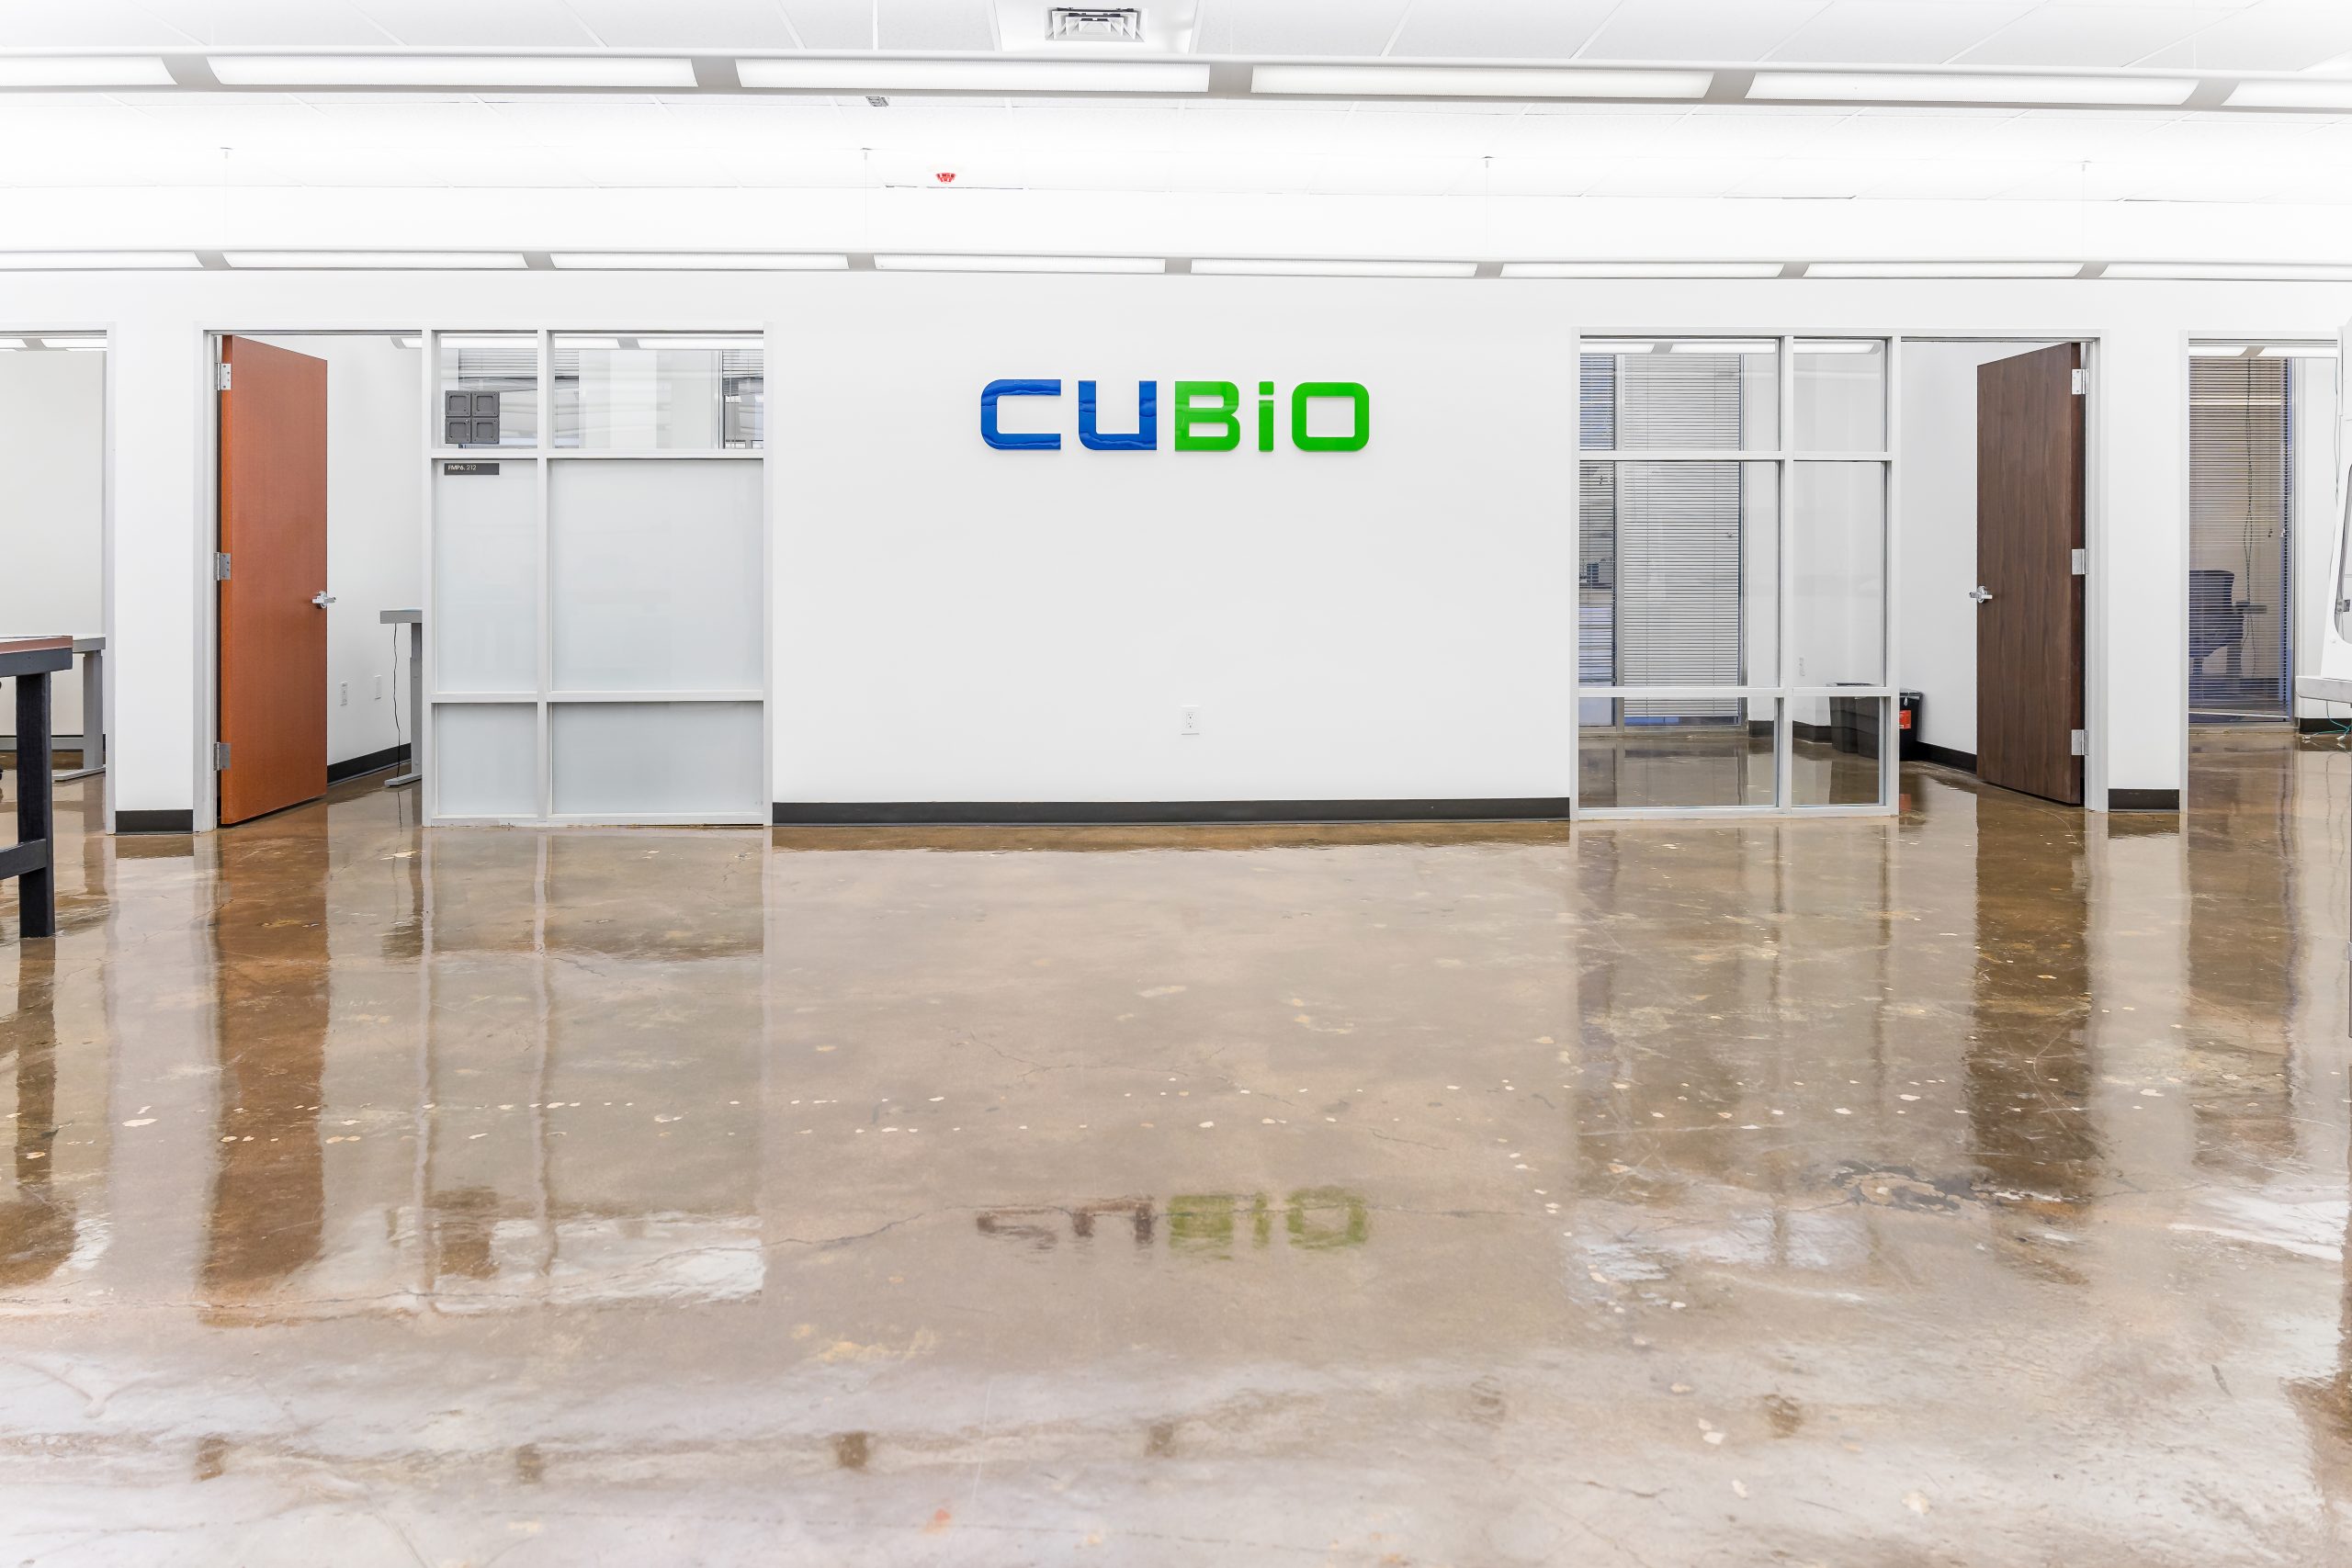 CUBIO sign and doors to offices in the main lab